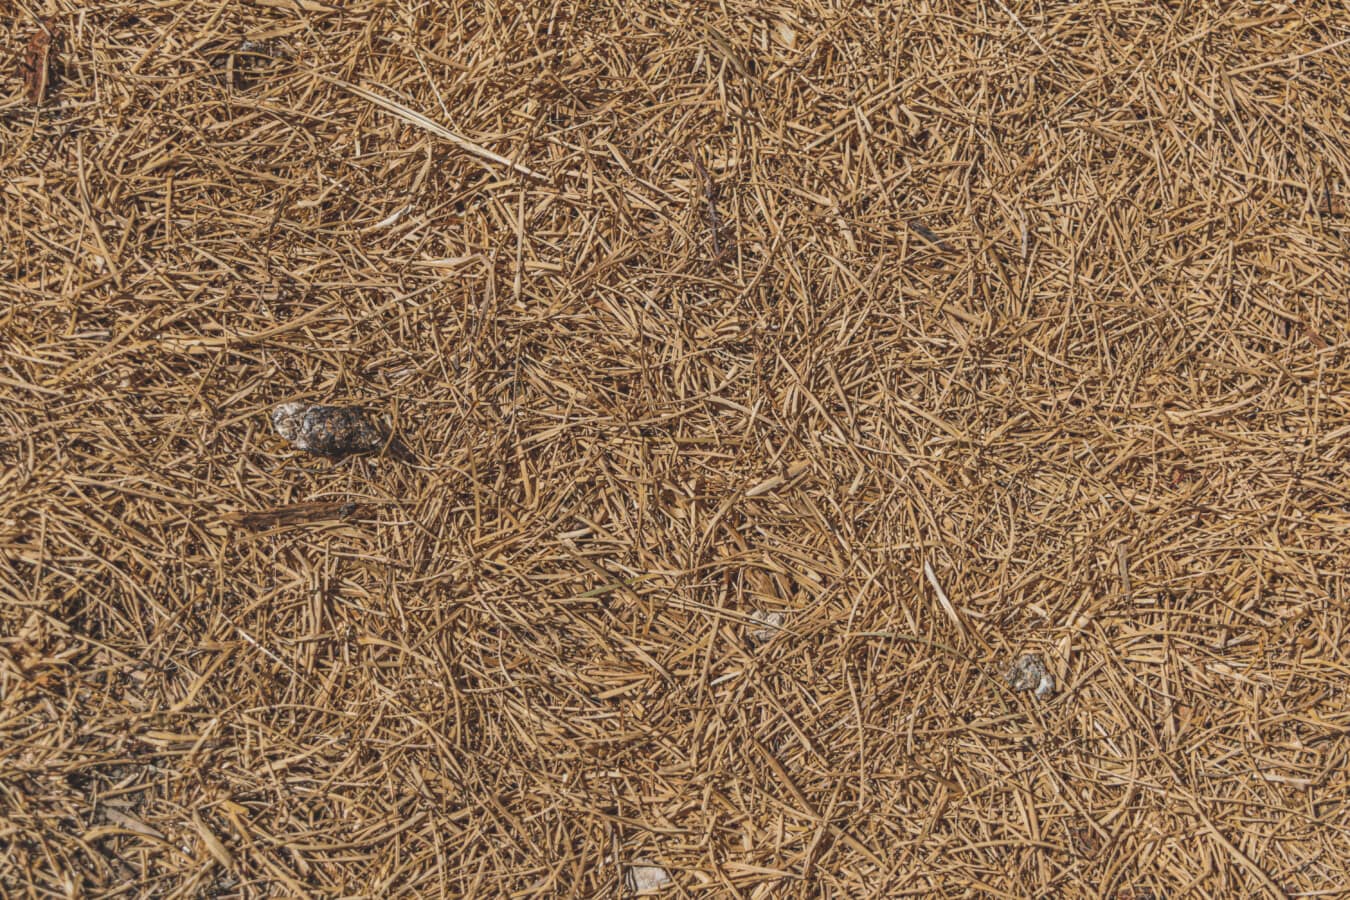 excrement, feces, grounds, dry, texture, light brown, pattern, background, upclose, dirty